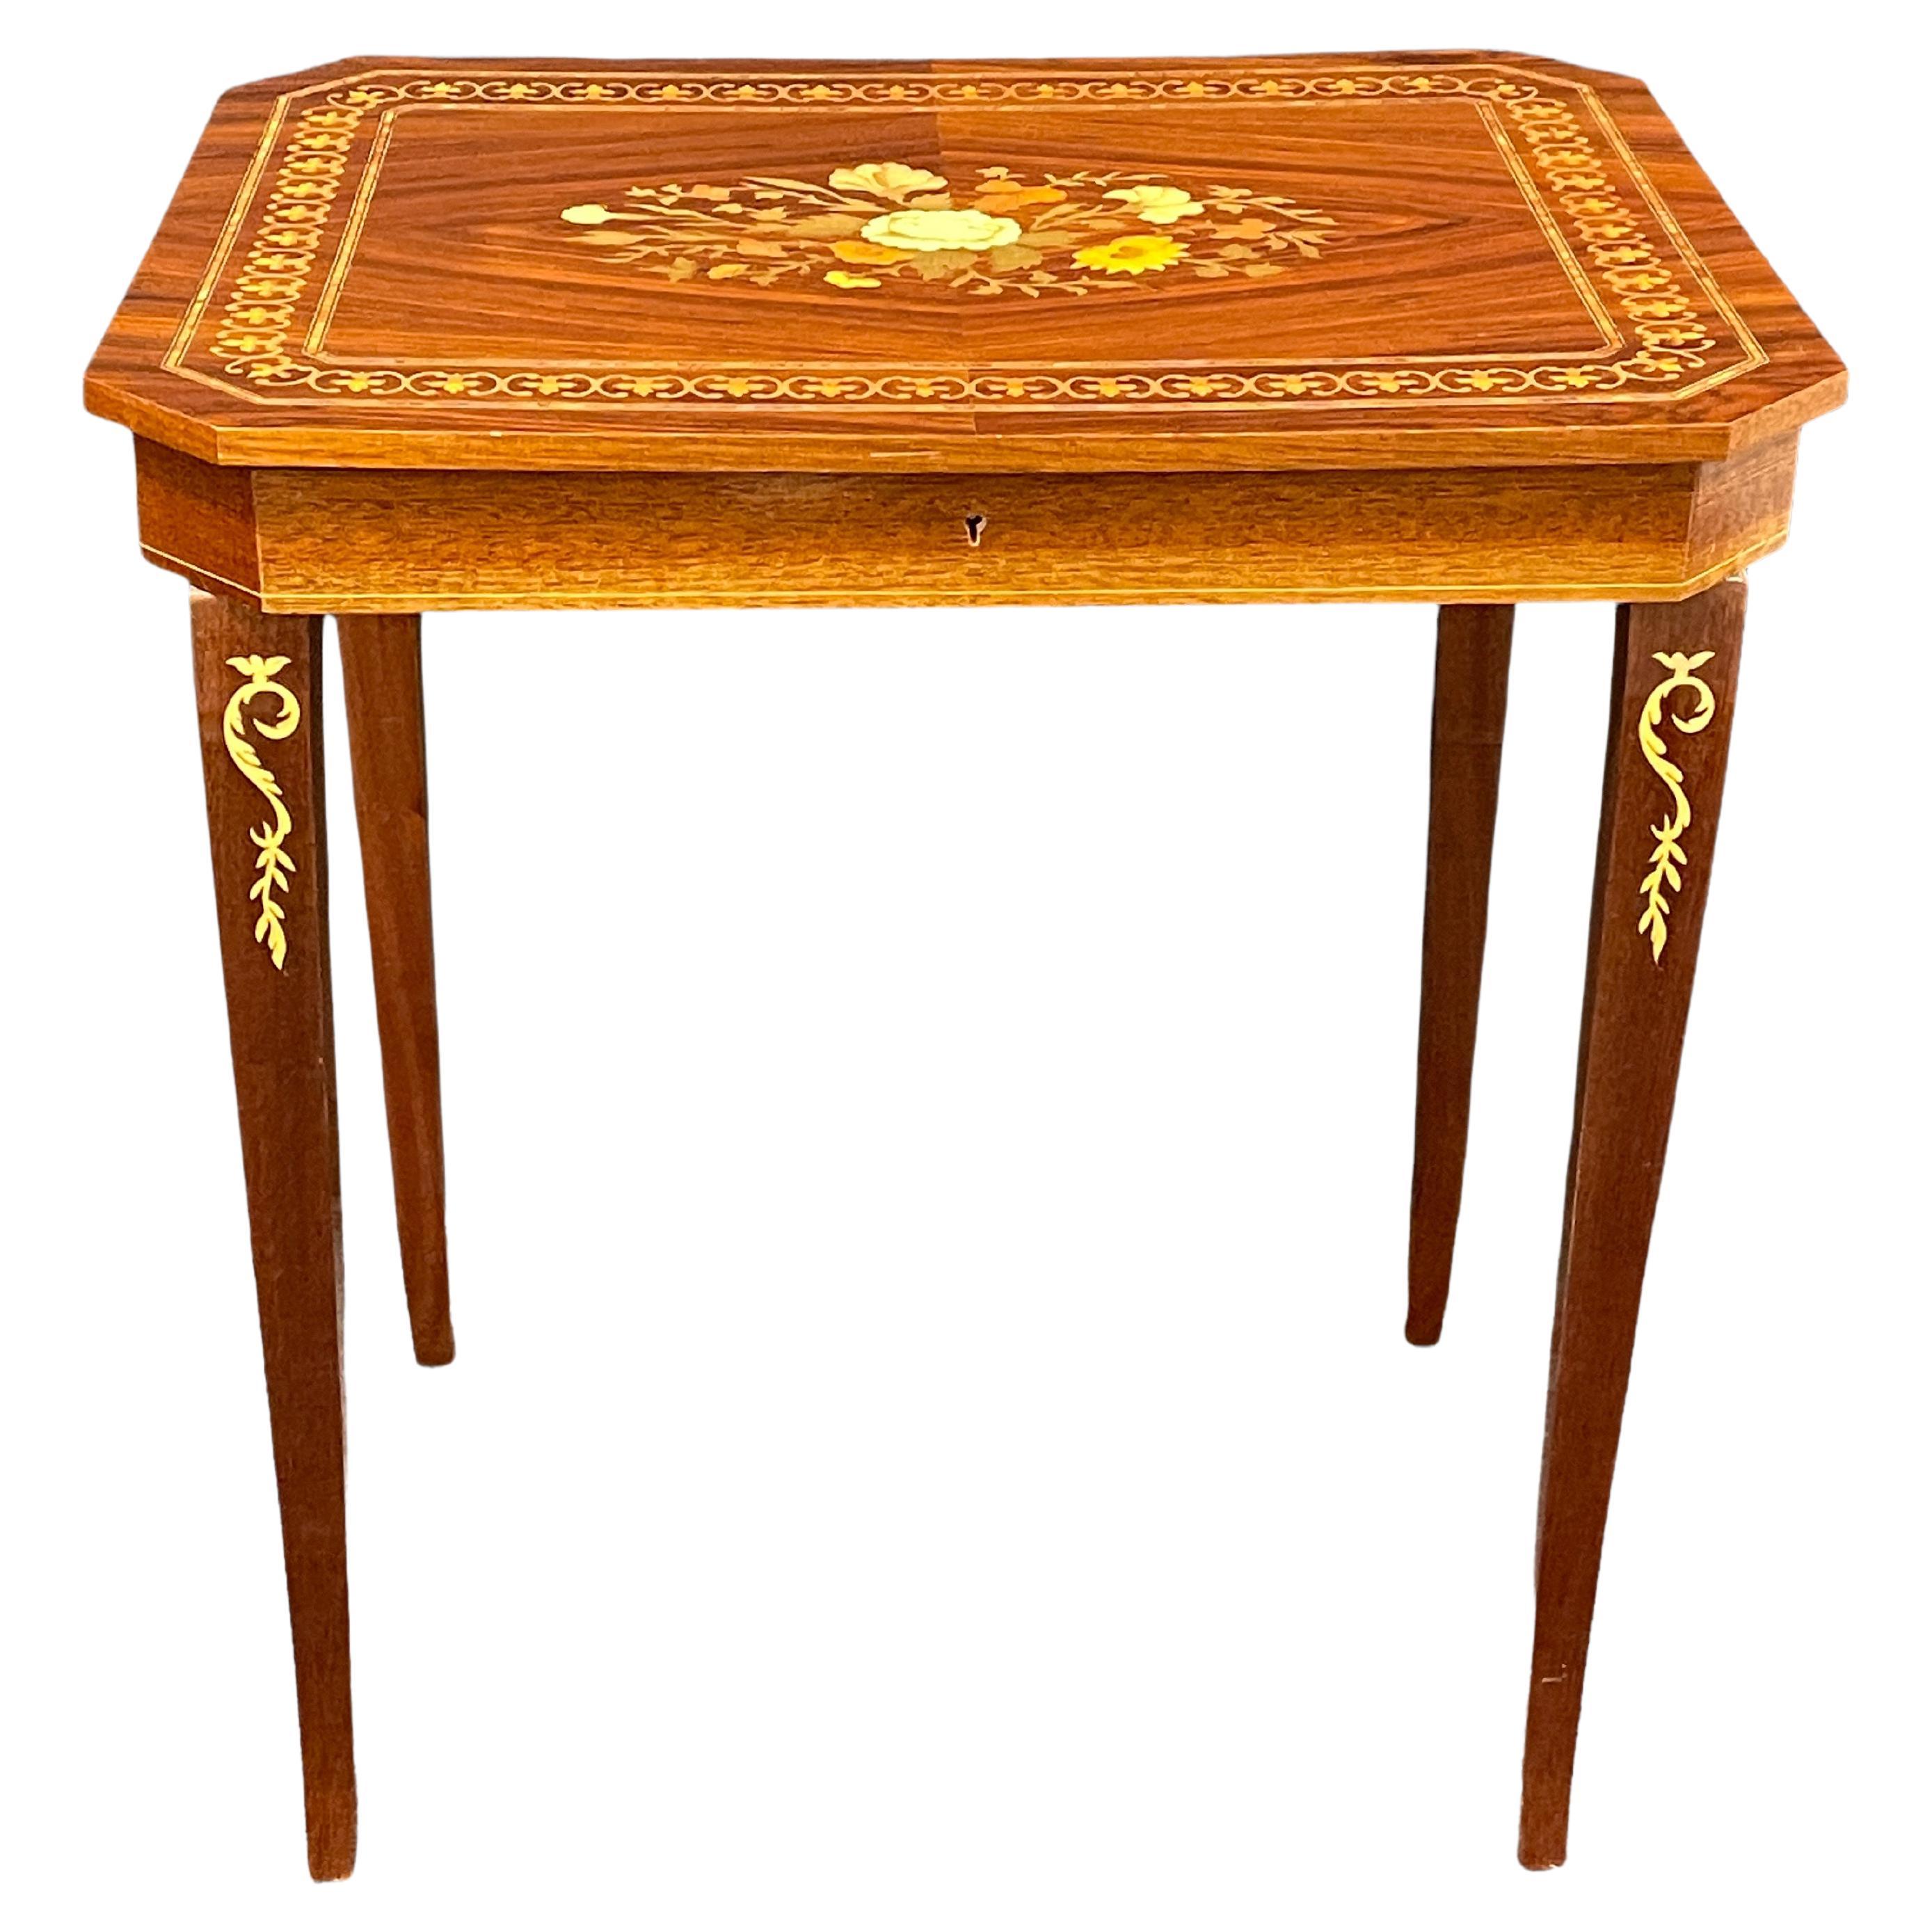 20th Century Small Inlaid Side Table with Jewelry Compartment and Music Box For Sale